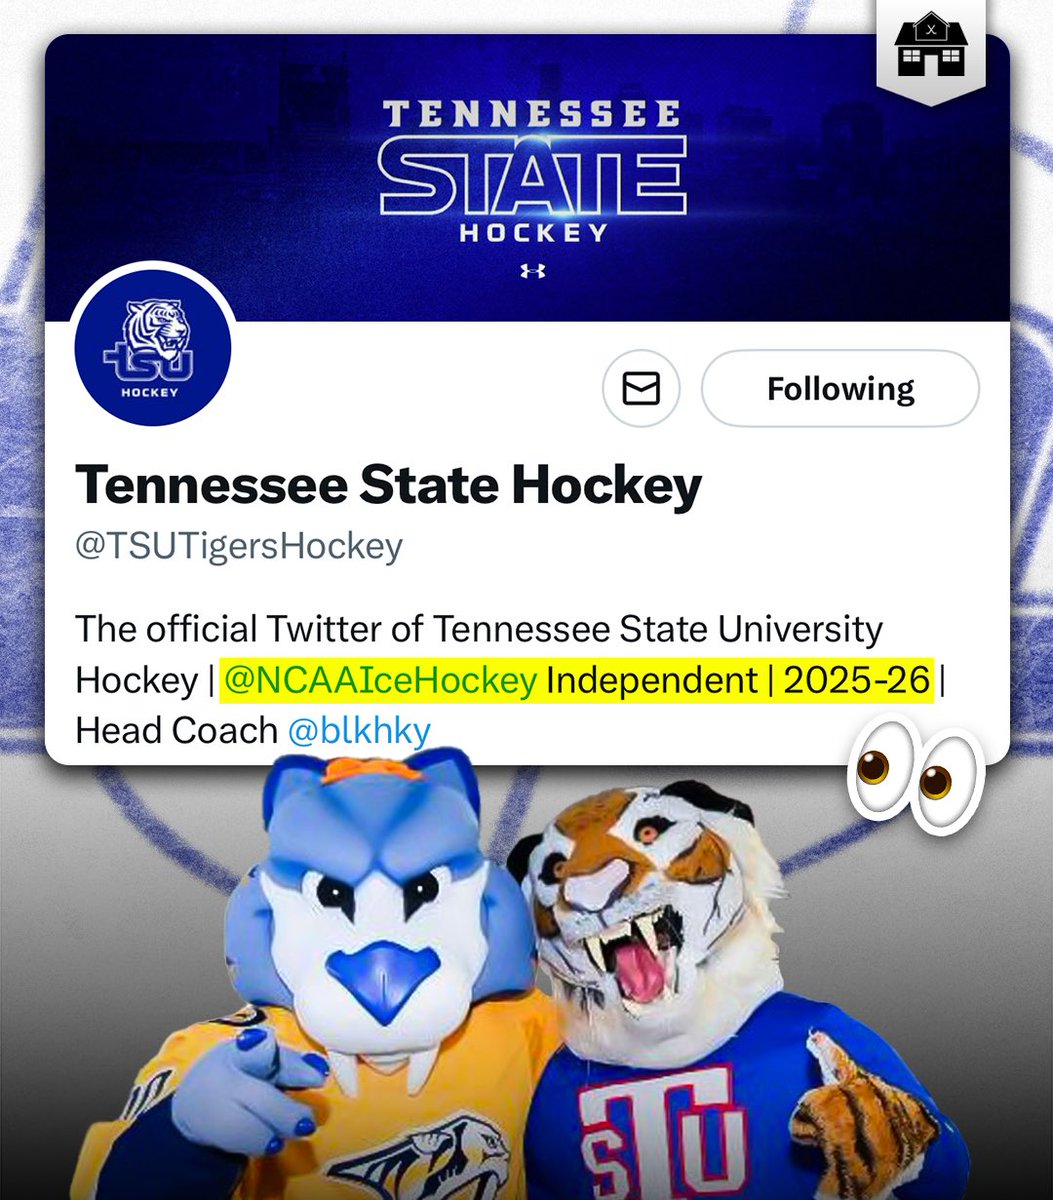 Tennessee State’s new bio 👀

Could an official announcement about @TSUTigersHockey joining @NCAAIceHockey be coming soon? 🤔